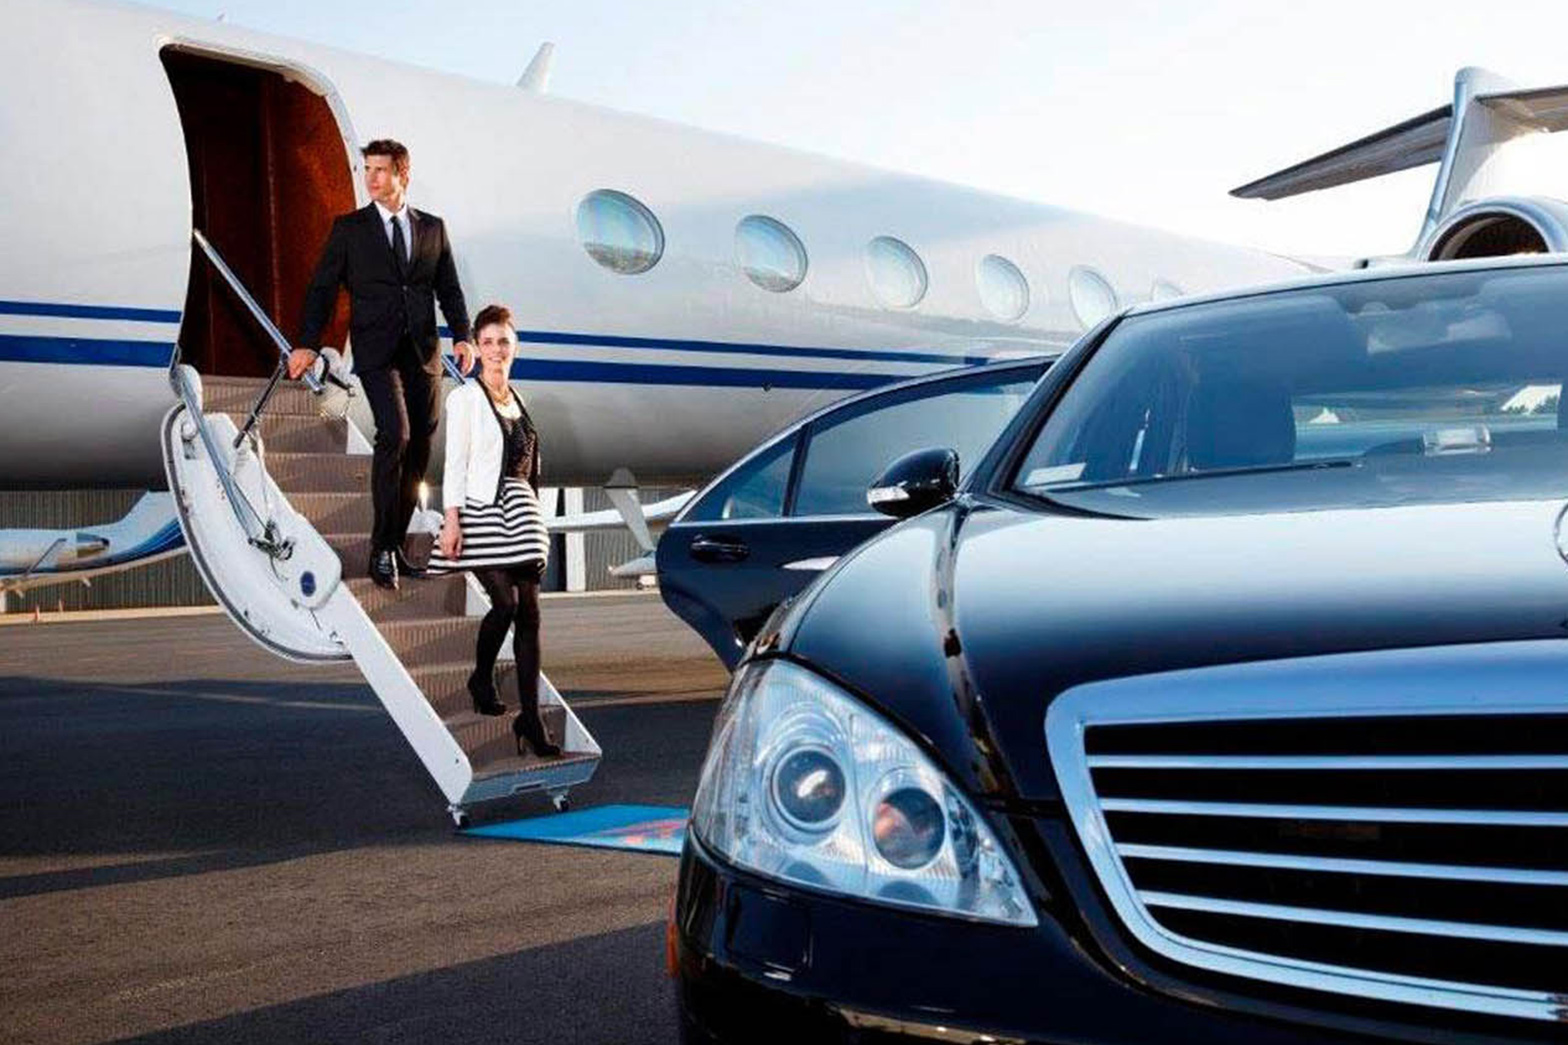 Airport Transportation services